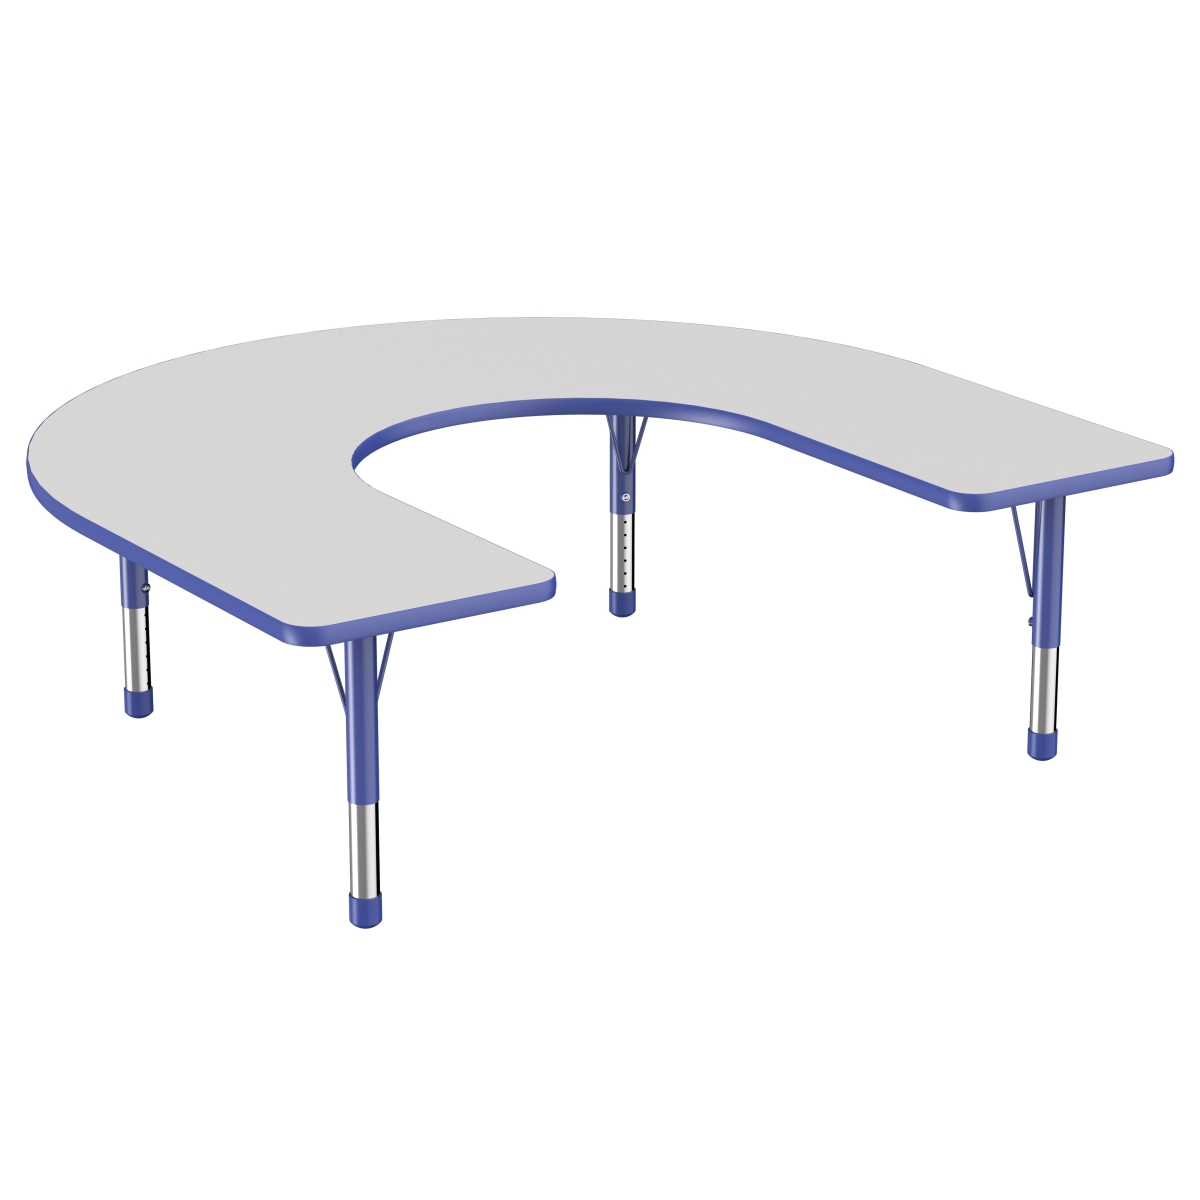 10095-gybl 60 X 66 In. Horseshoe T-mold Adjustable Activity Table With Chunky Leg - Grey & Blue